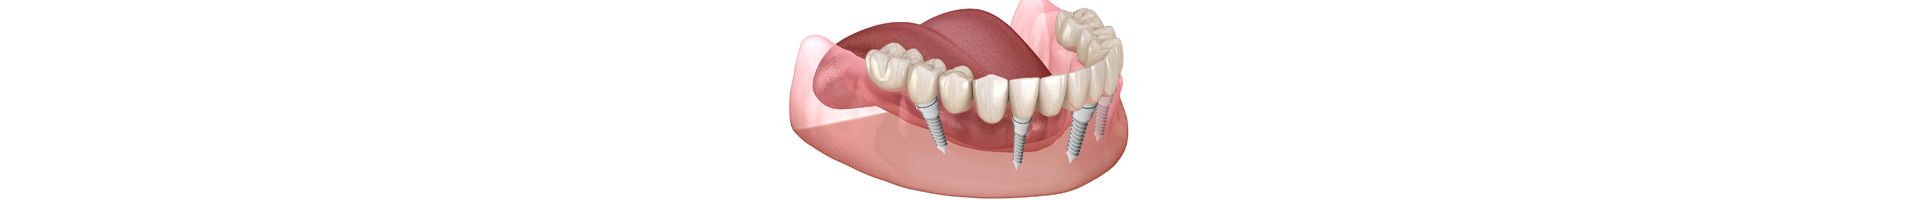 Full Mouth Reconstruction: Functional, Biocompatible, and Beautiful-looking All-on-6 Ceramic Implants